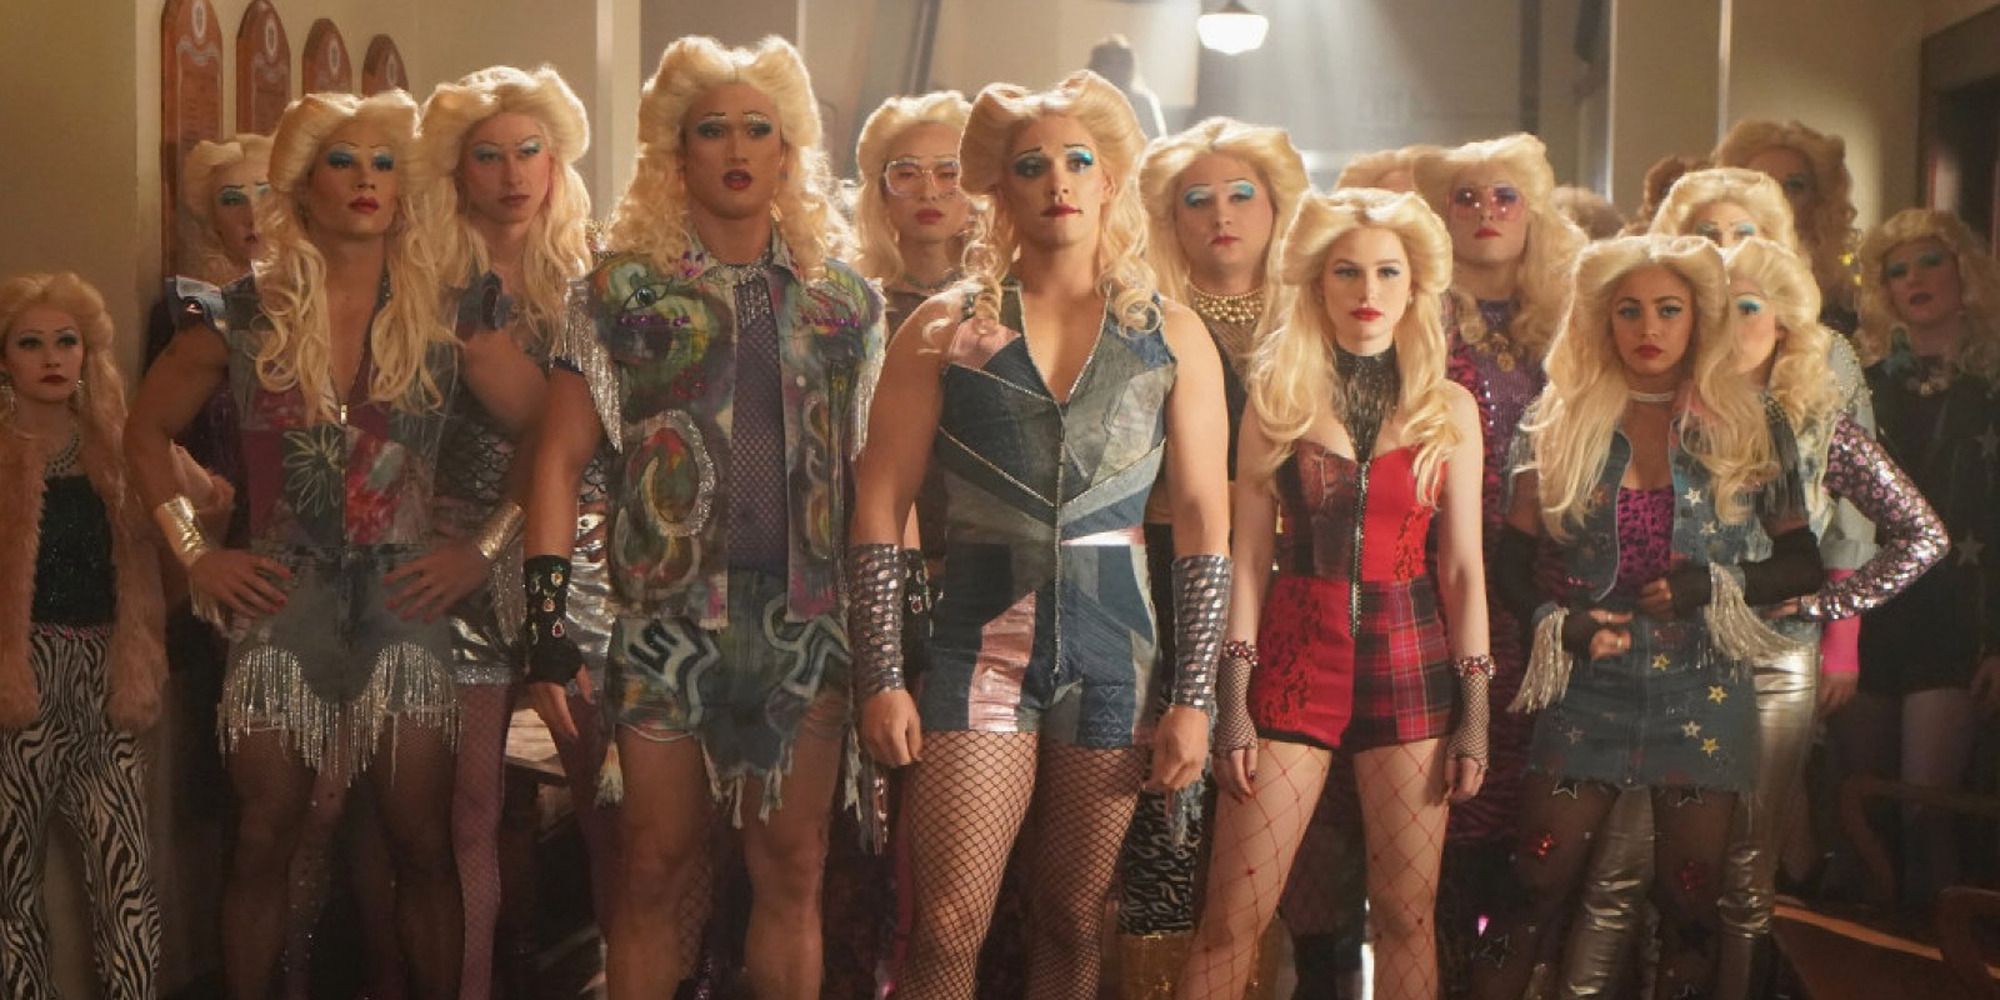 A group of teens dressed as characters from Hedwig and the Angry Inch